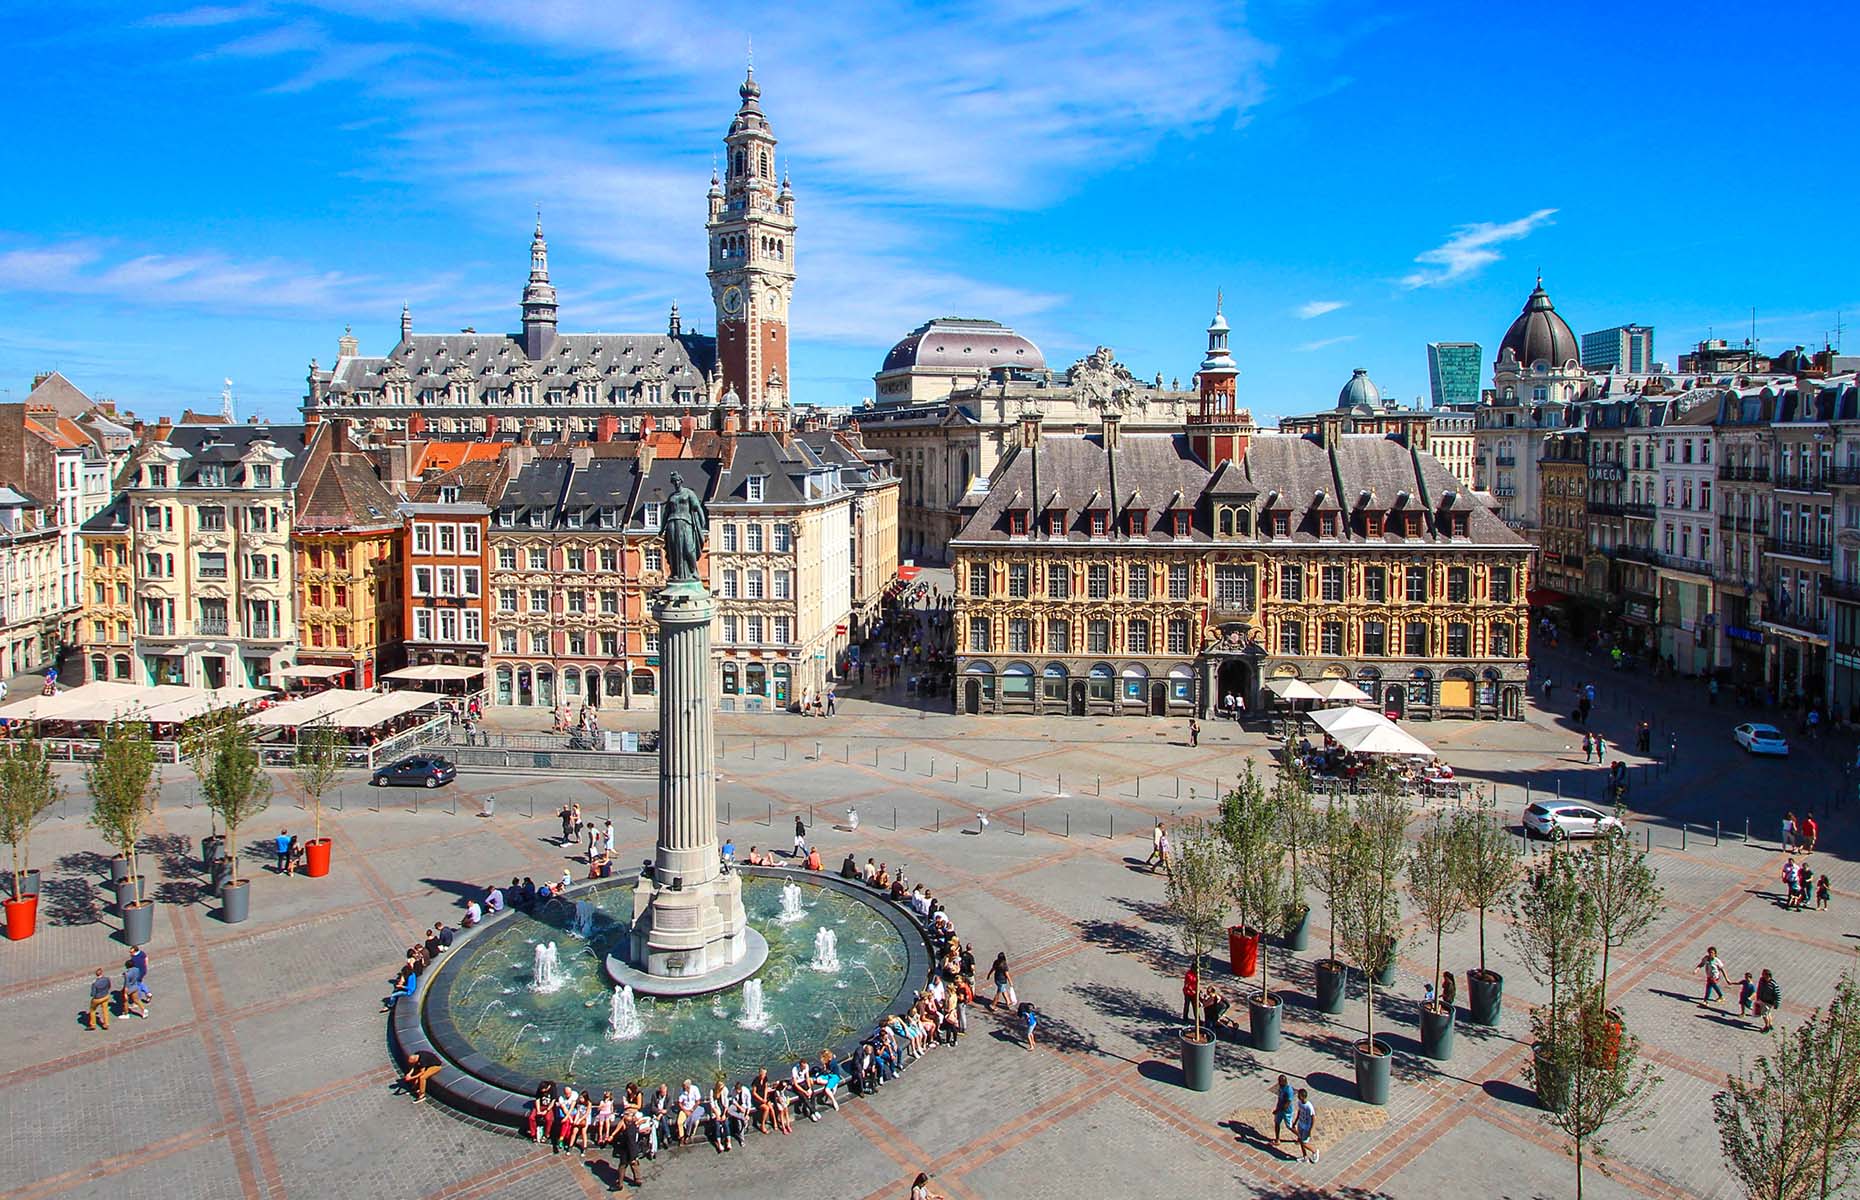 Lille in northern France (Image: MisterStock/Shutterstock)